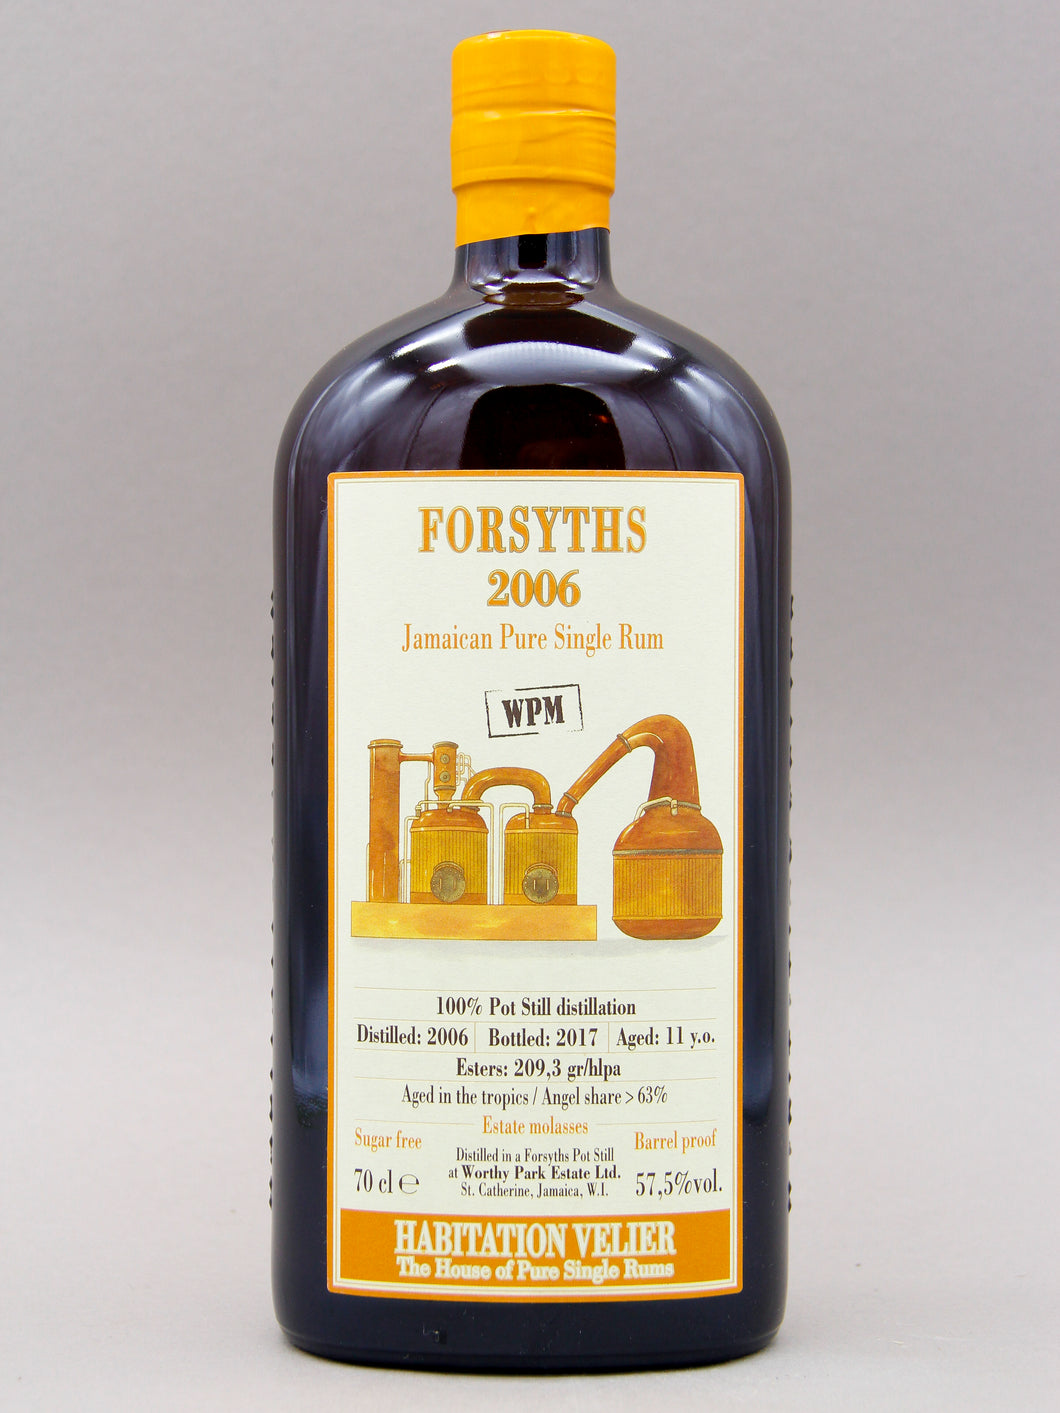 Habitation Velier, Forsyths 2006, WPM, Jamaica Pure Single Rum, Aged 11 years (57.5%, 70cl)